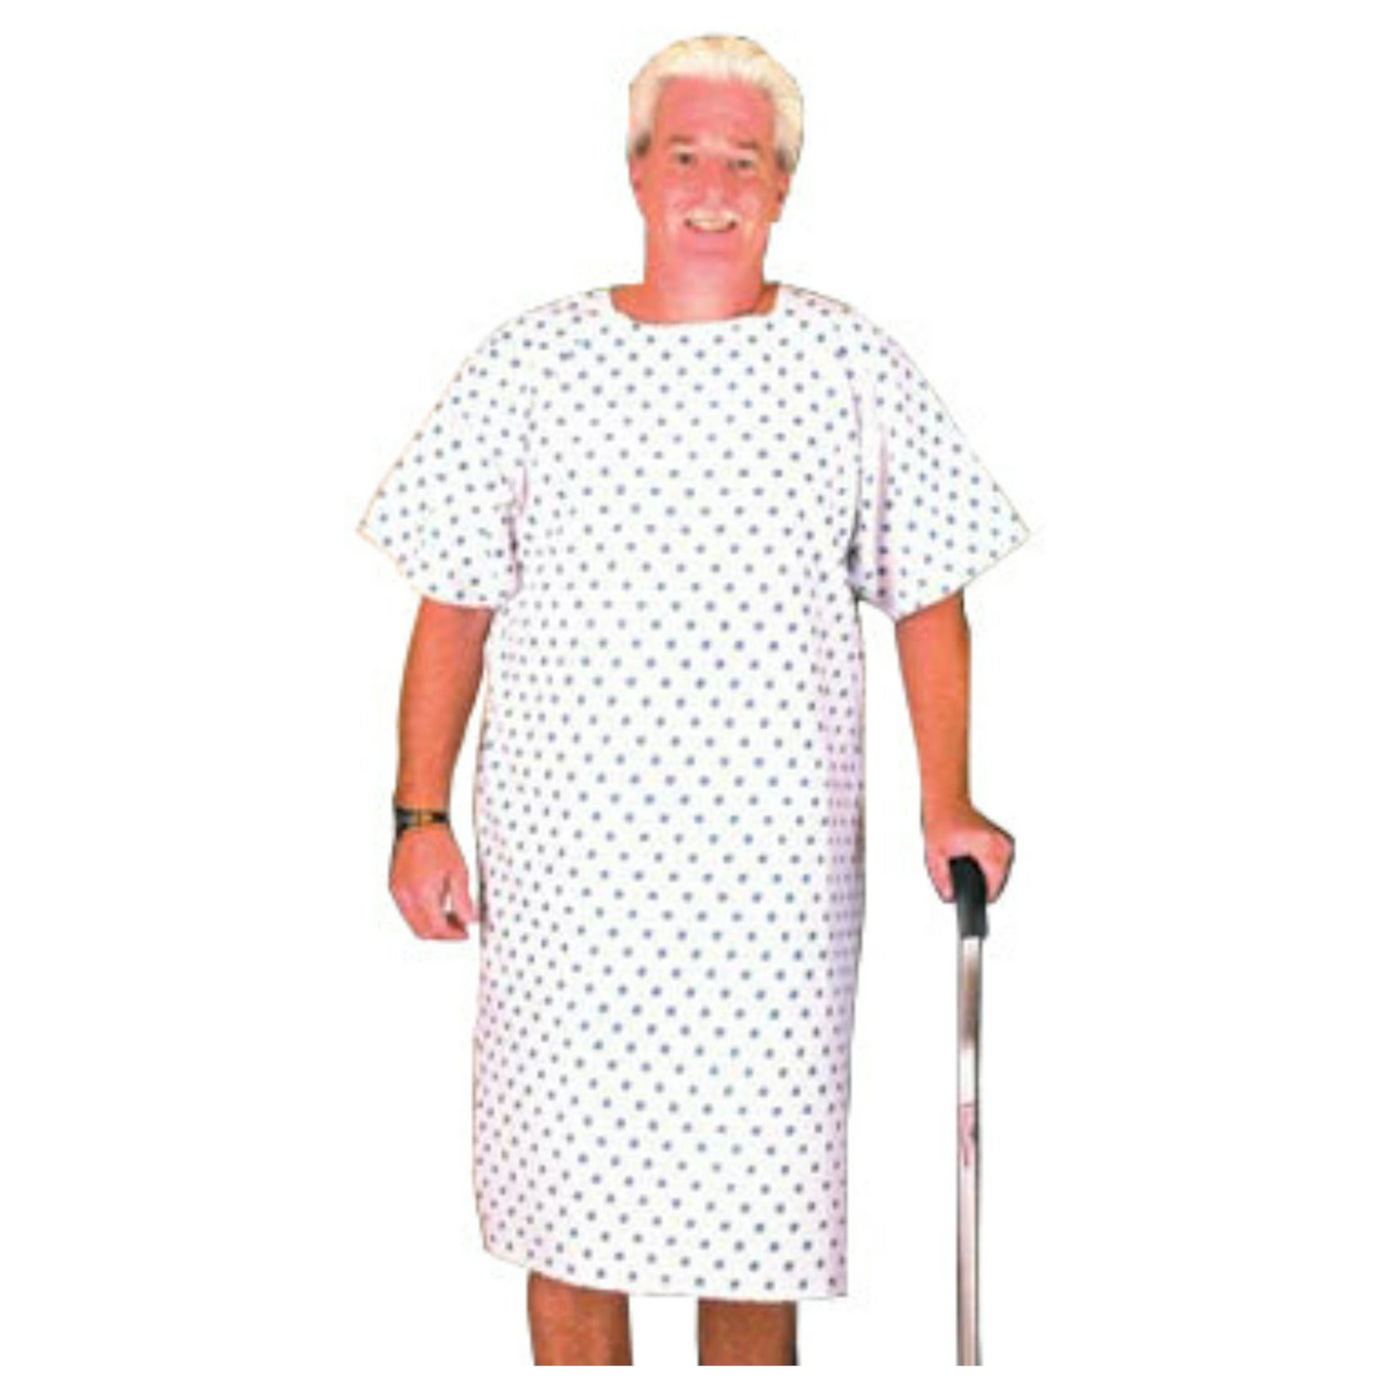 Buy X-Ray Patient Gowns Wholesale | X-Ray PPE | Kimono Style